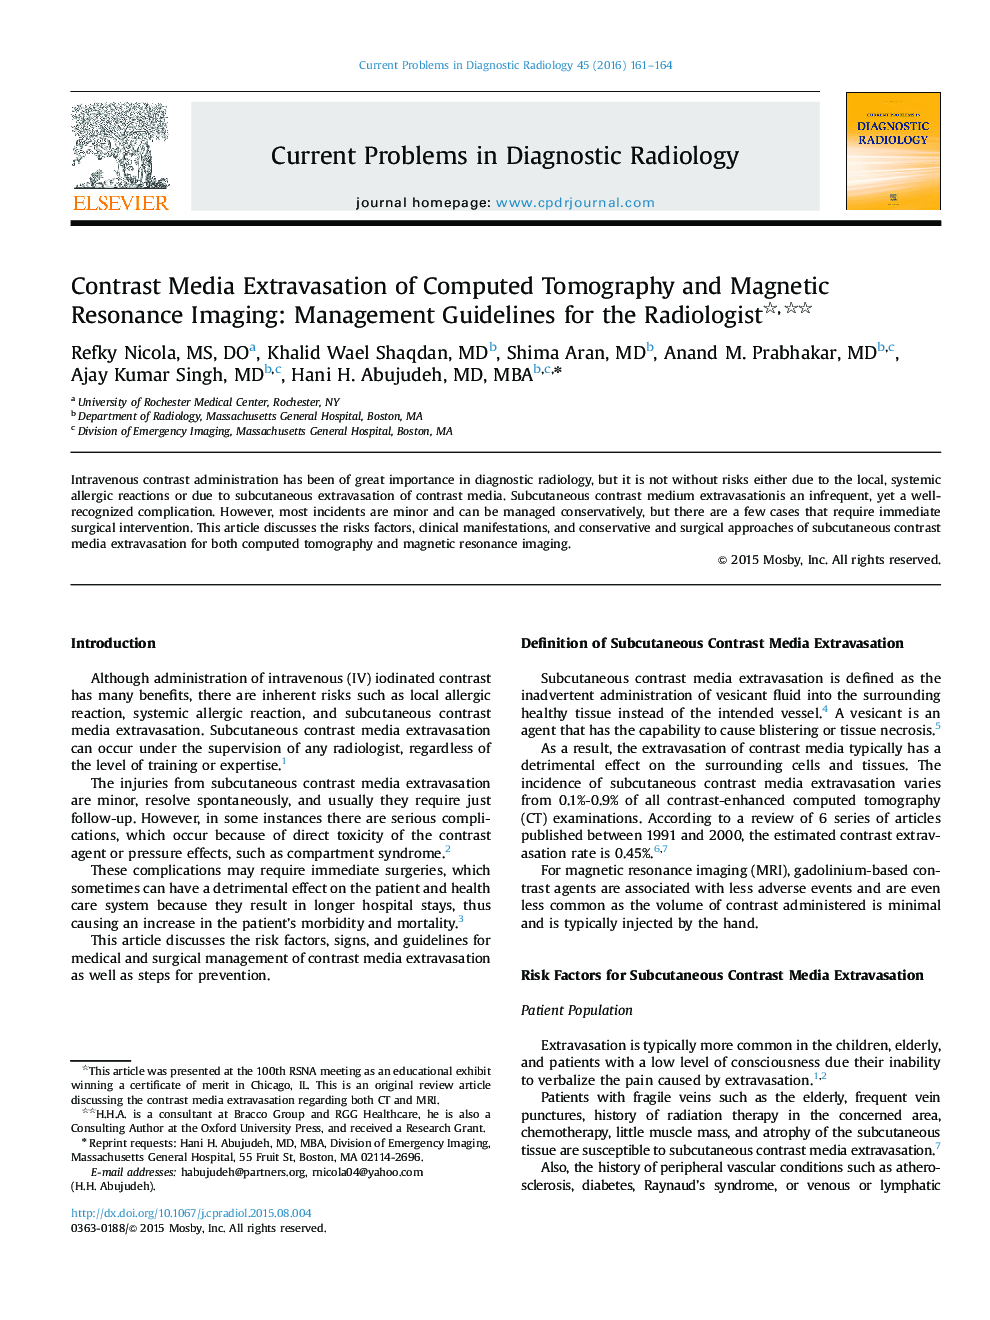 Contrast Media Extravasation of Computed Tomography and Magnetic Resonance Imaging: Management Guidelines for the Radiologist 